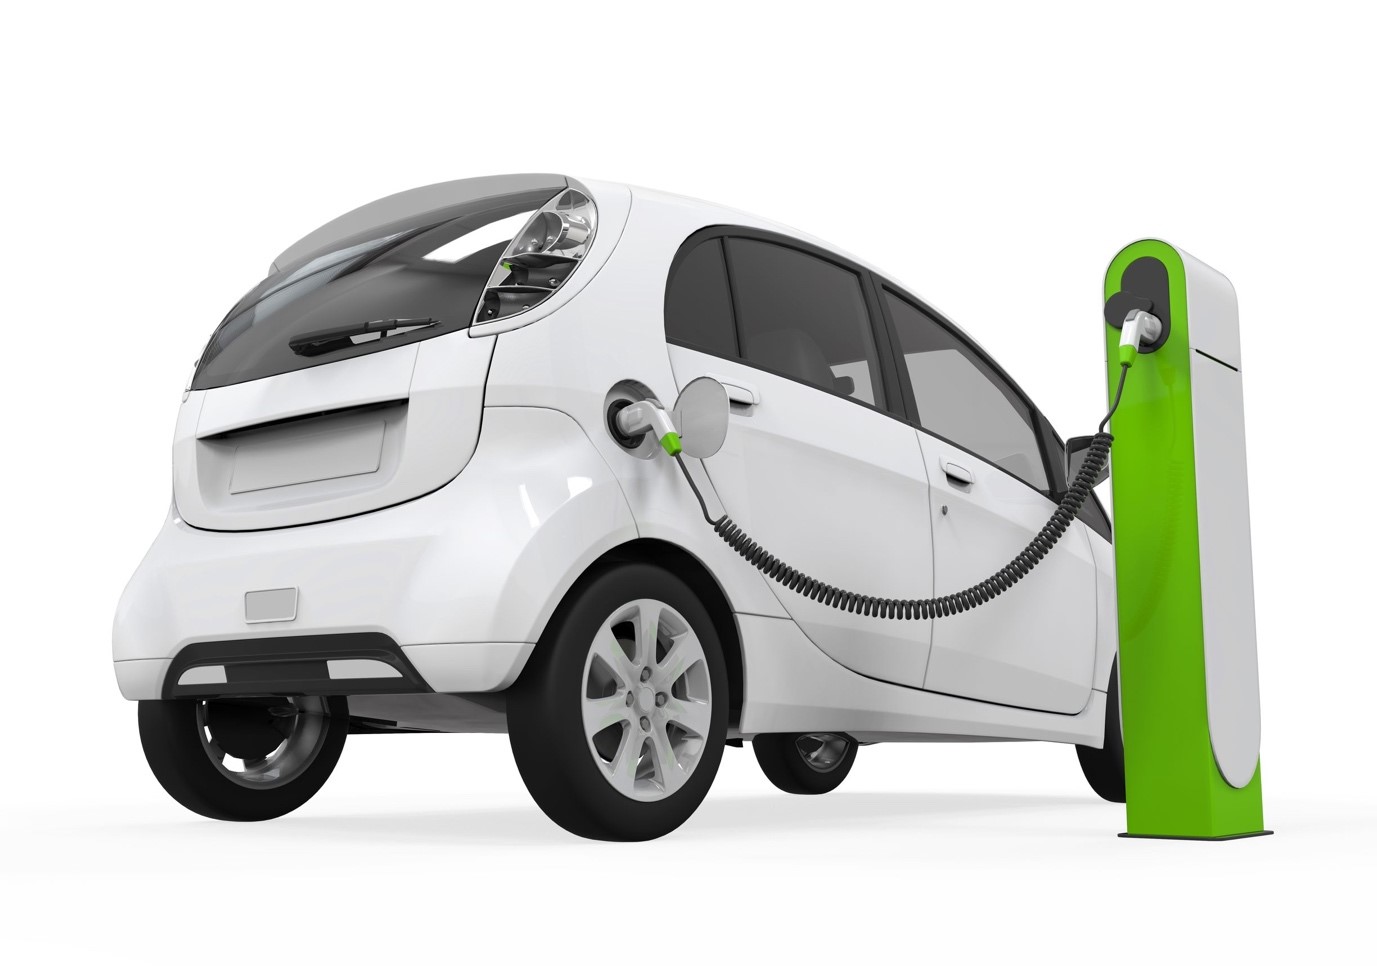 What new technologies will electric vehicles bring?